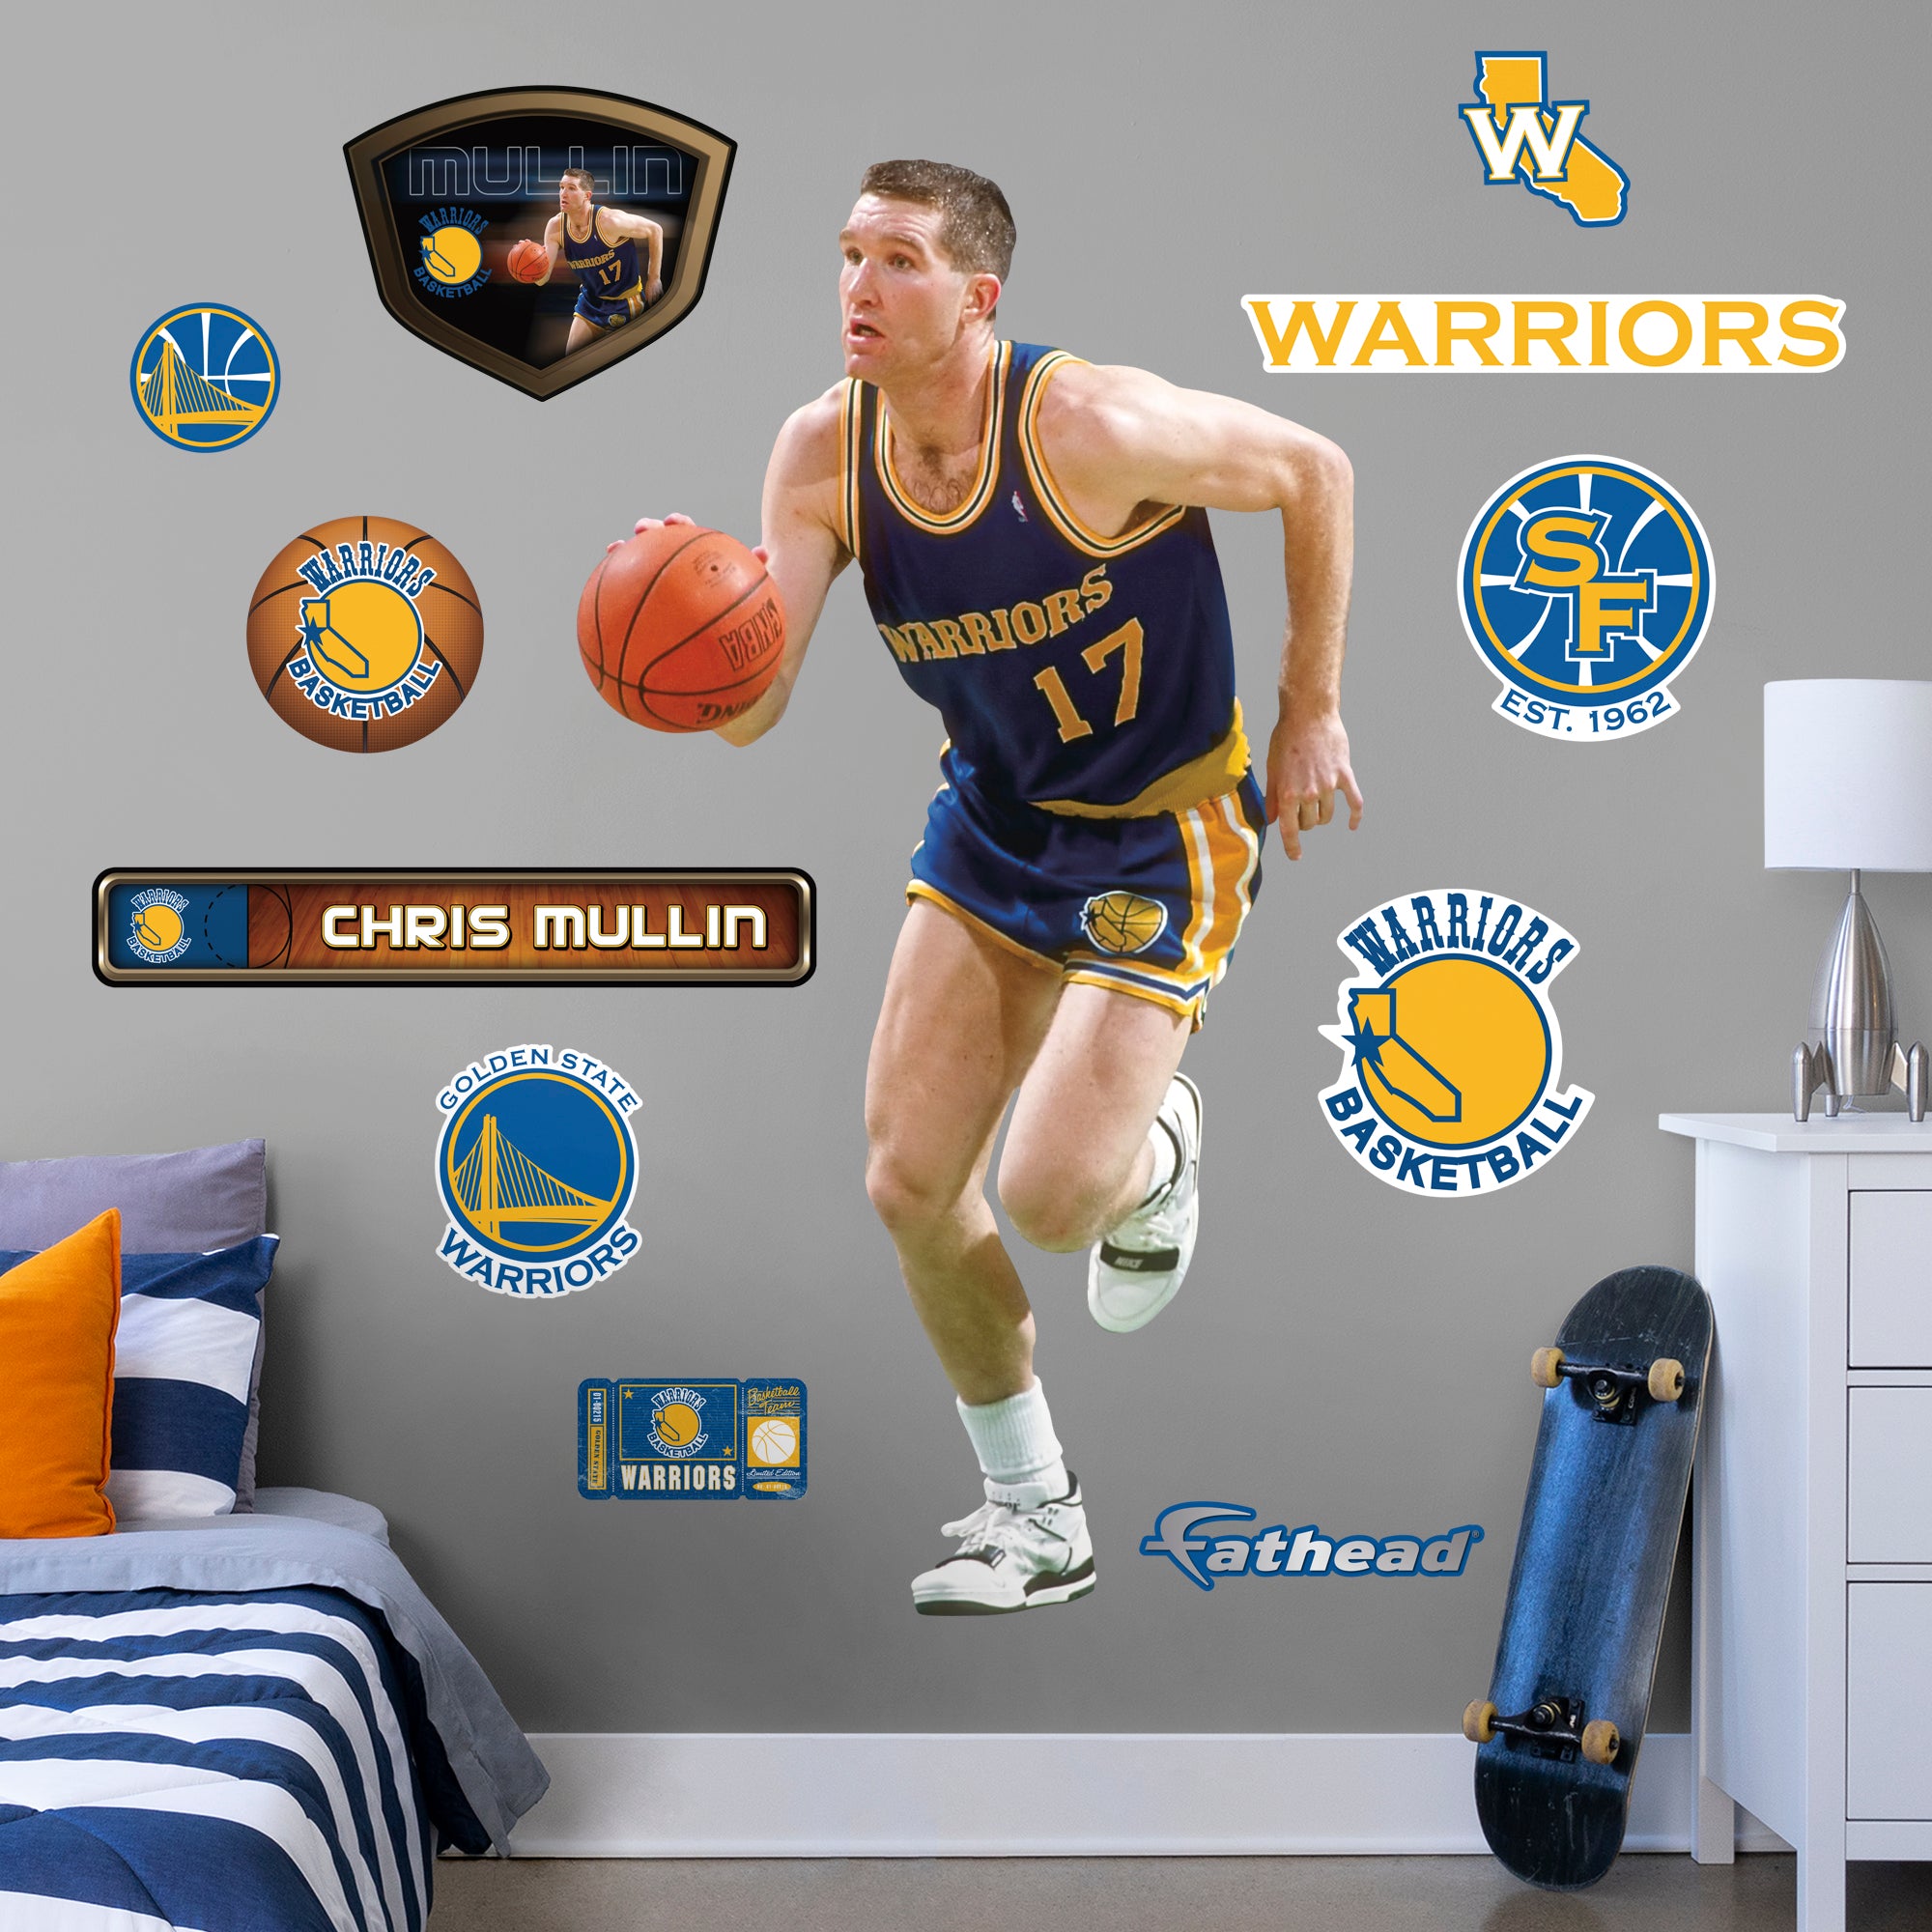 Chris Mullen Legend - Officially Licensed NBA Removable Wall Decal Life-Size Athlete + 11 Decals (41"W x 76"H) by Fathead | Viny